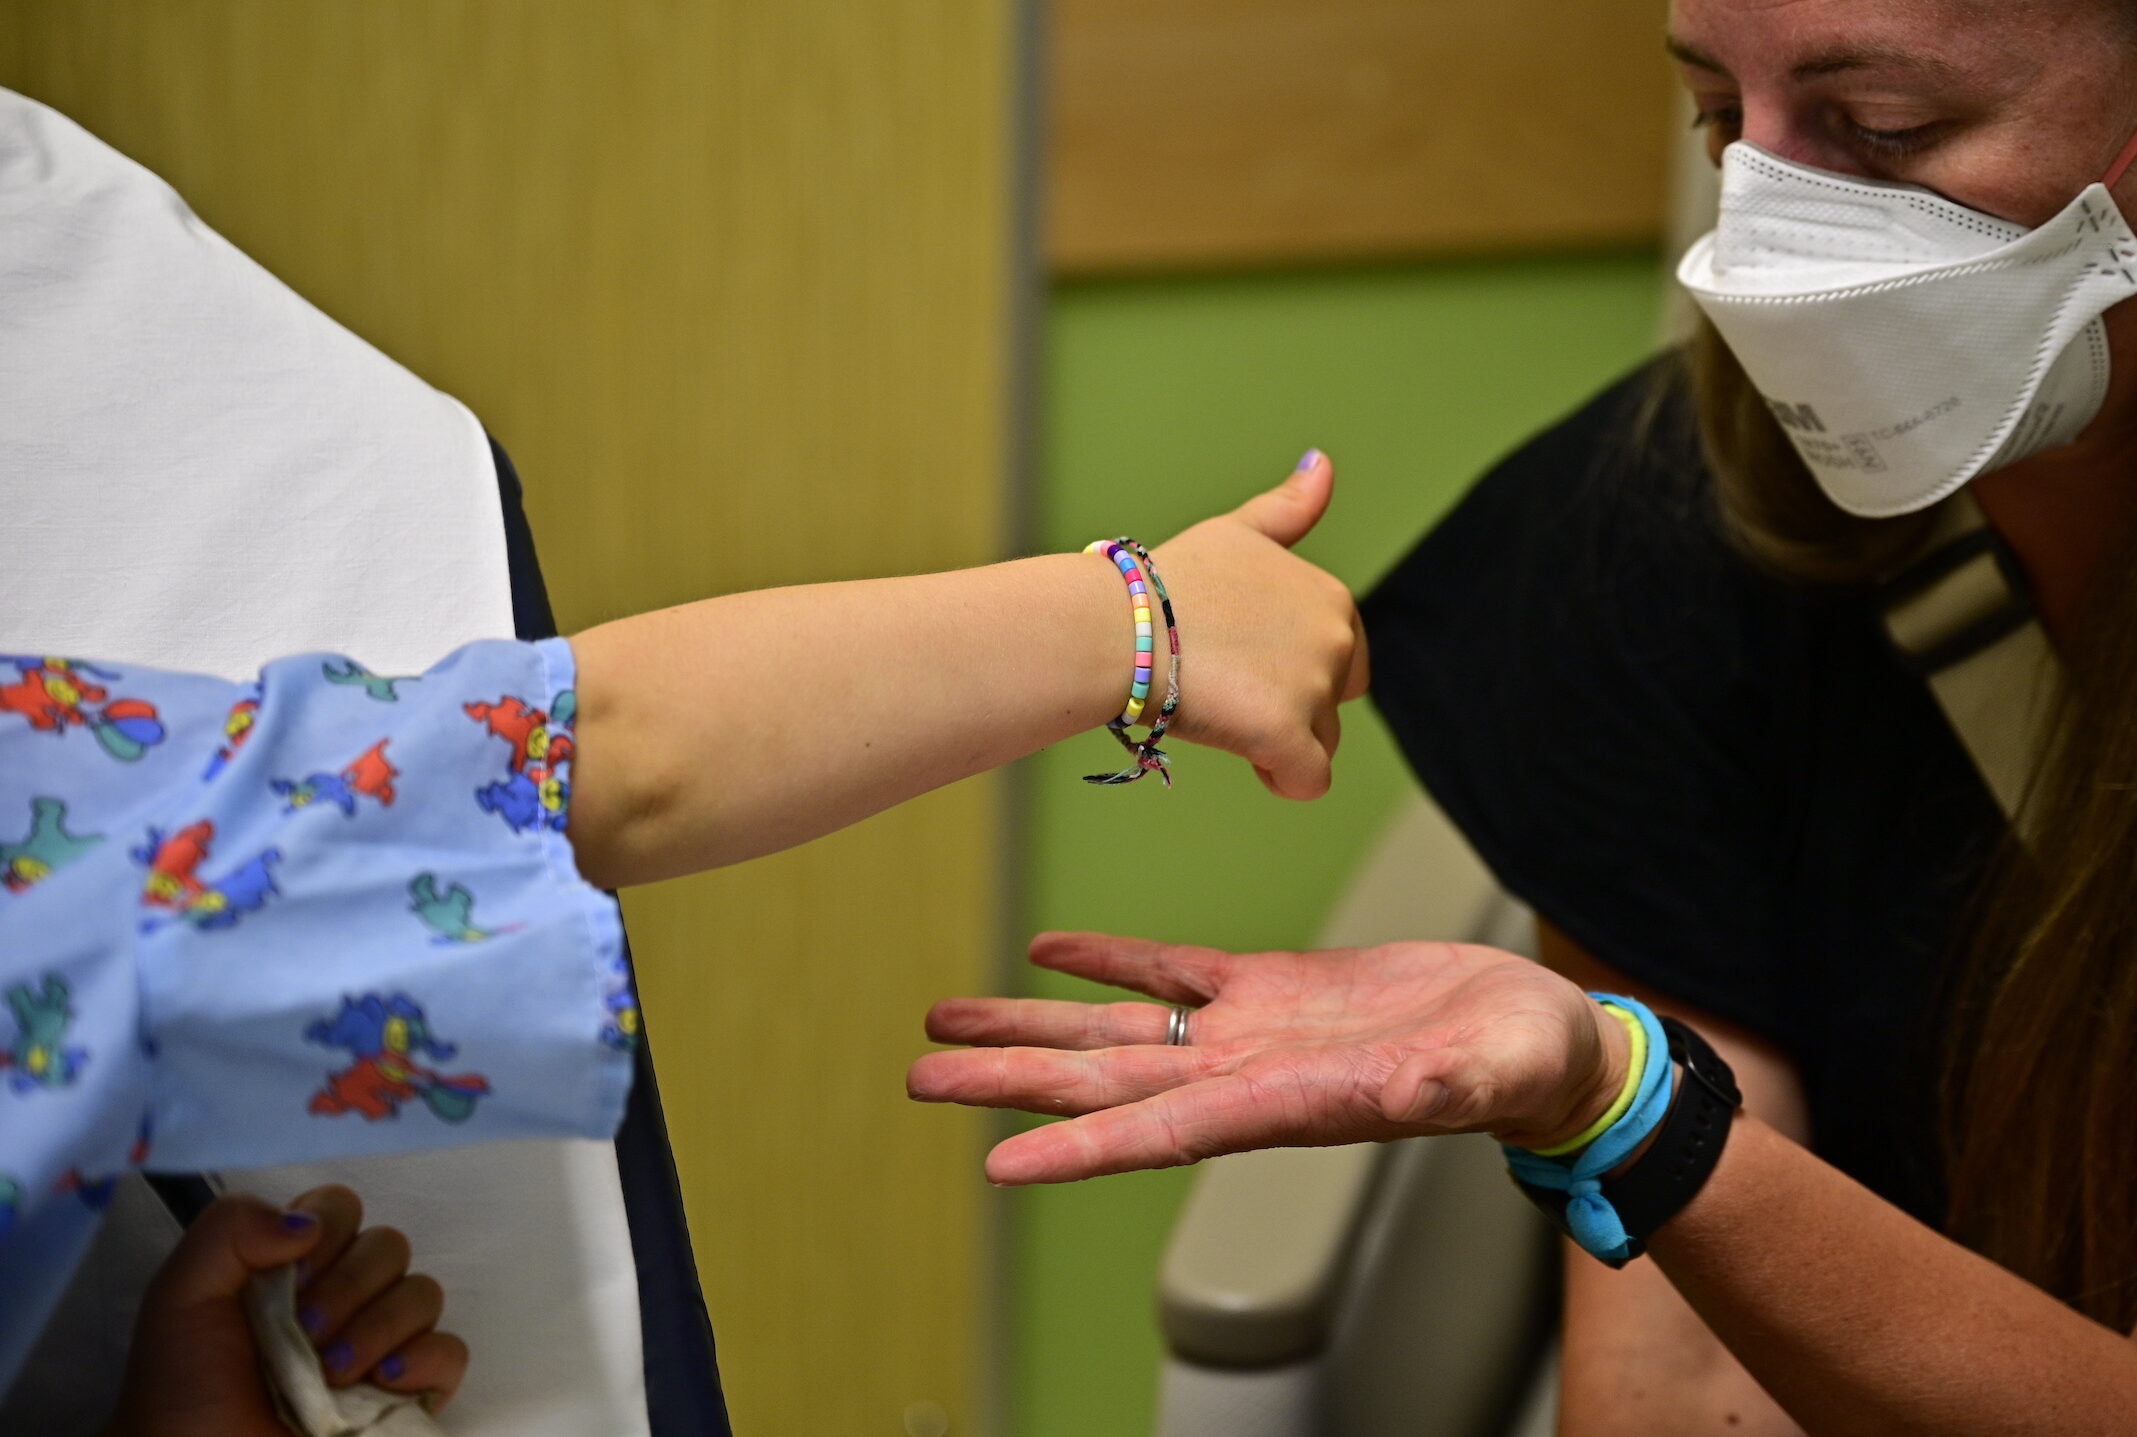 A child wearing a hospital gown reaching for a woman's outstretched hand